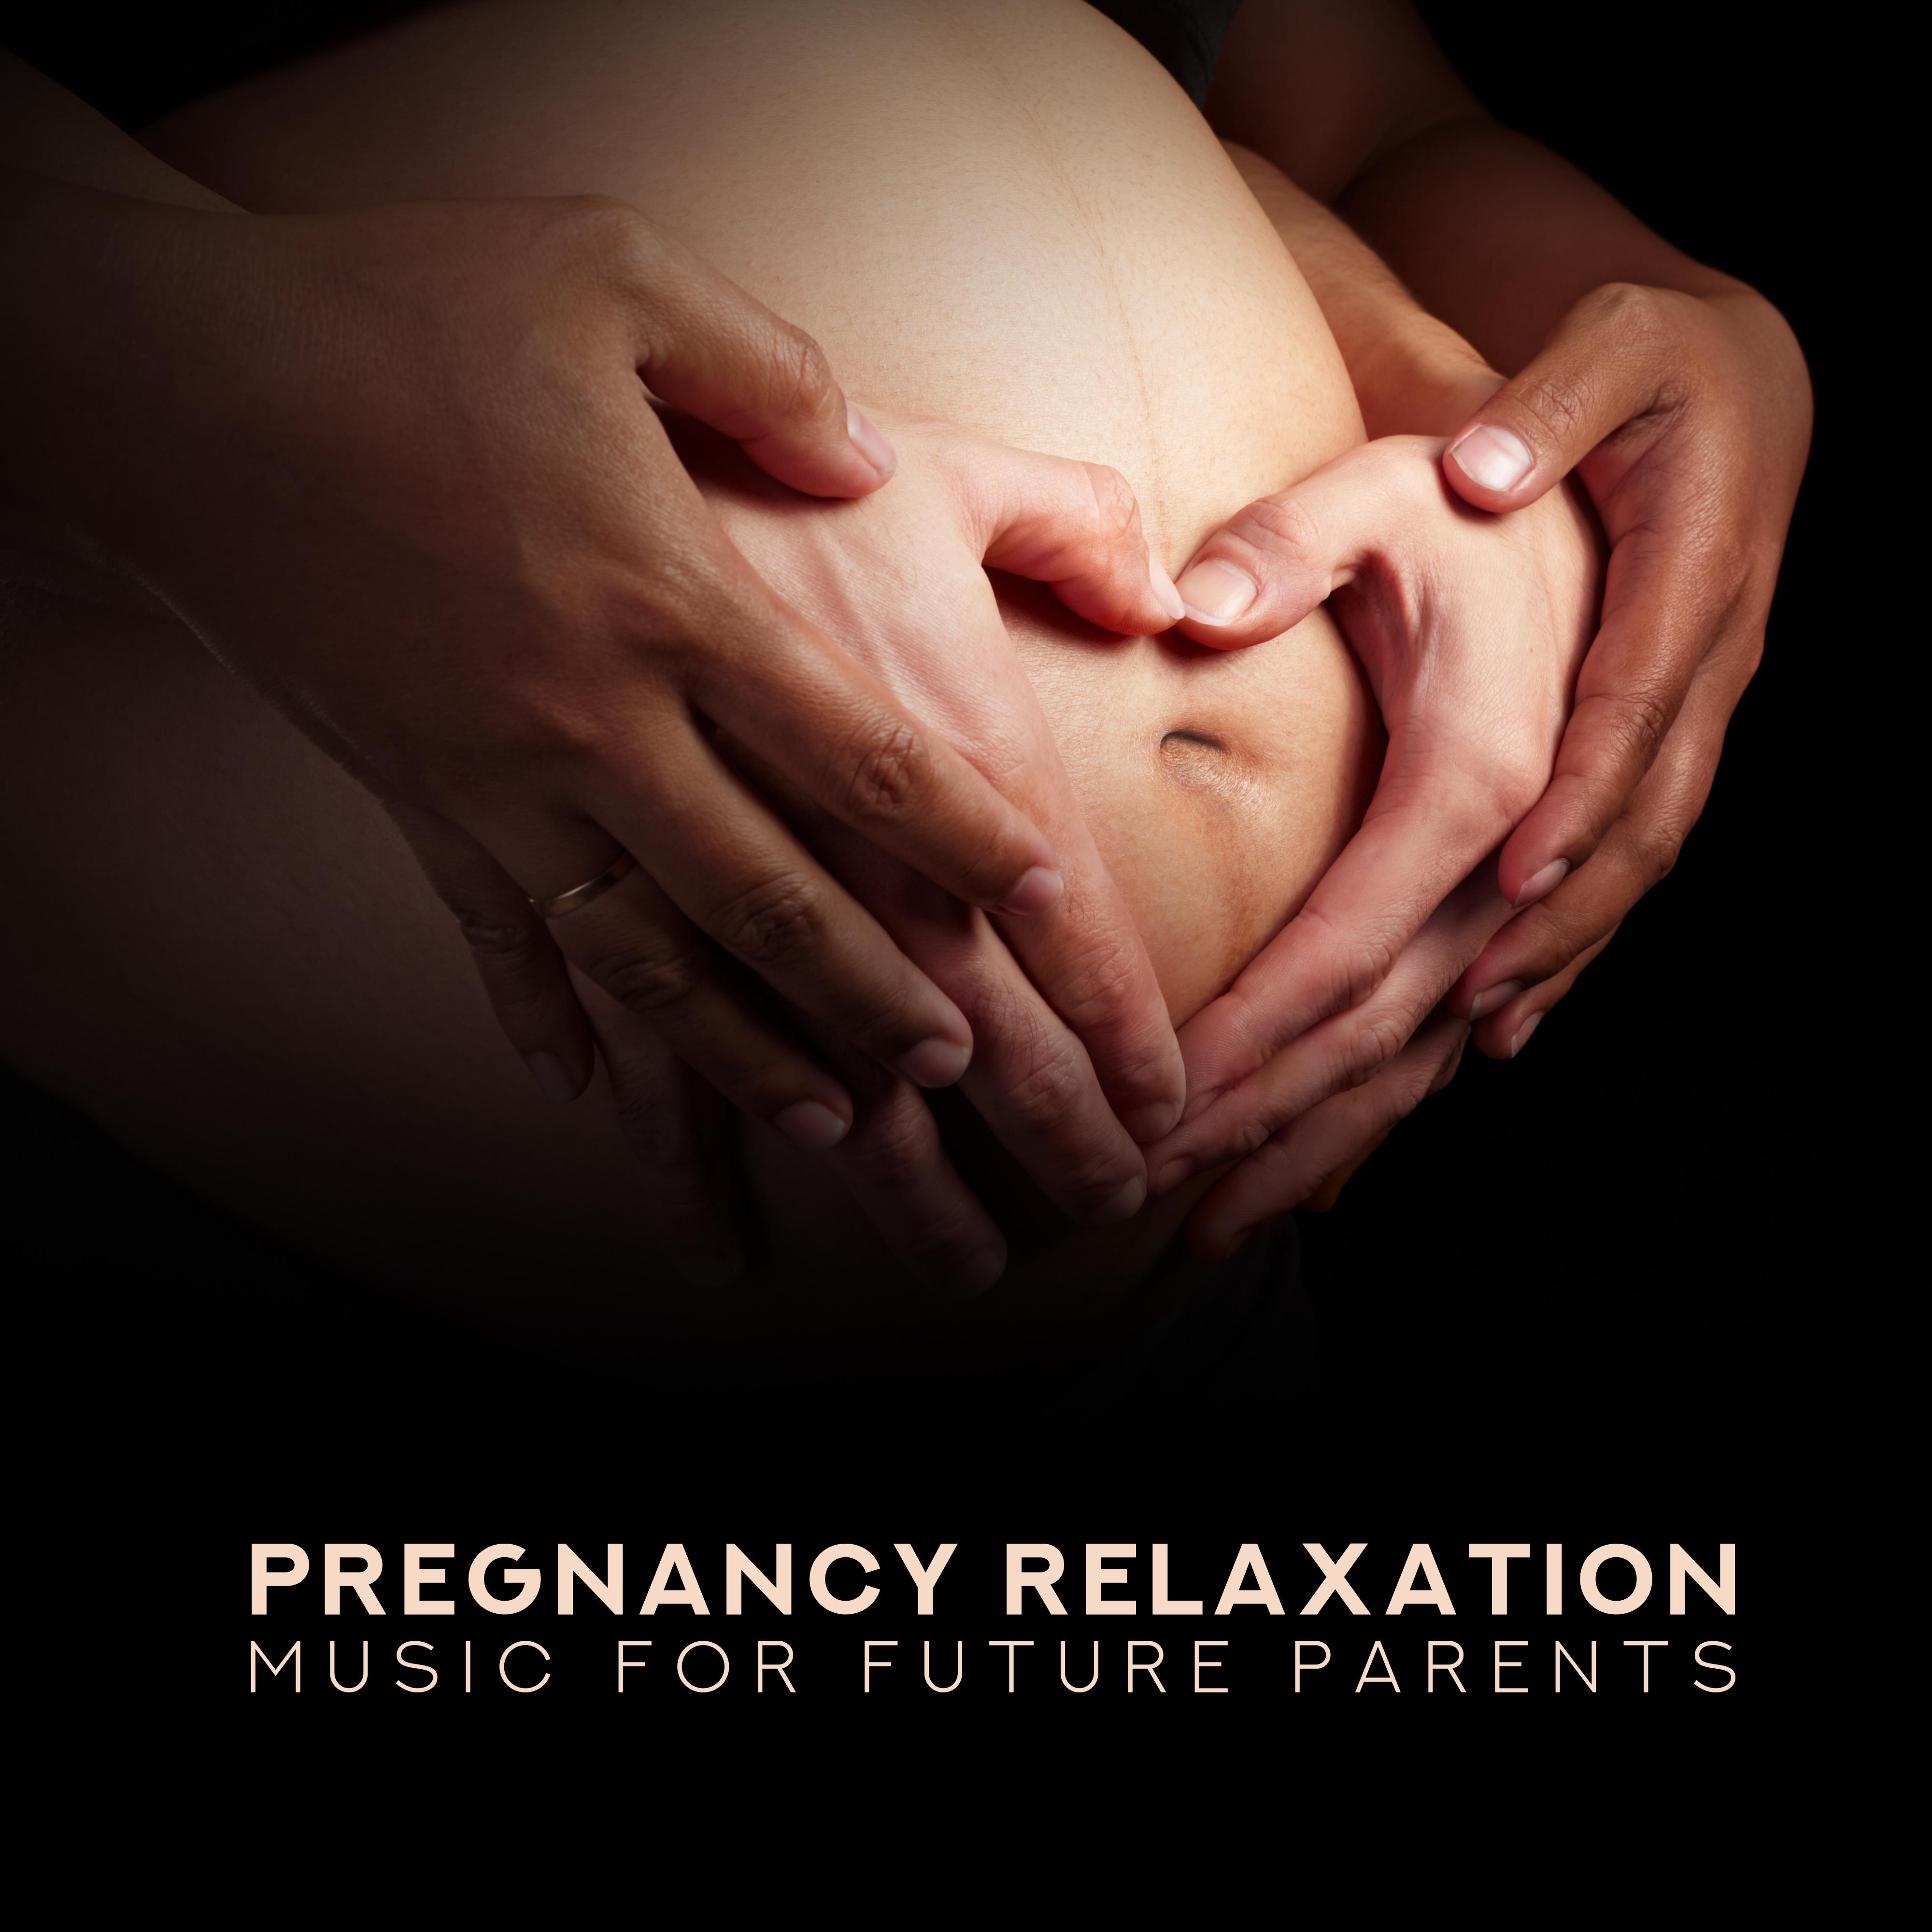 Pregnancy Relaxation Music for Future Parents